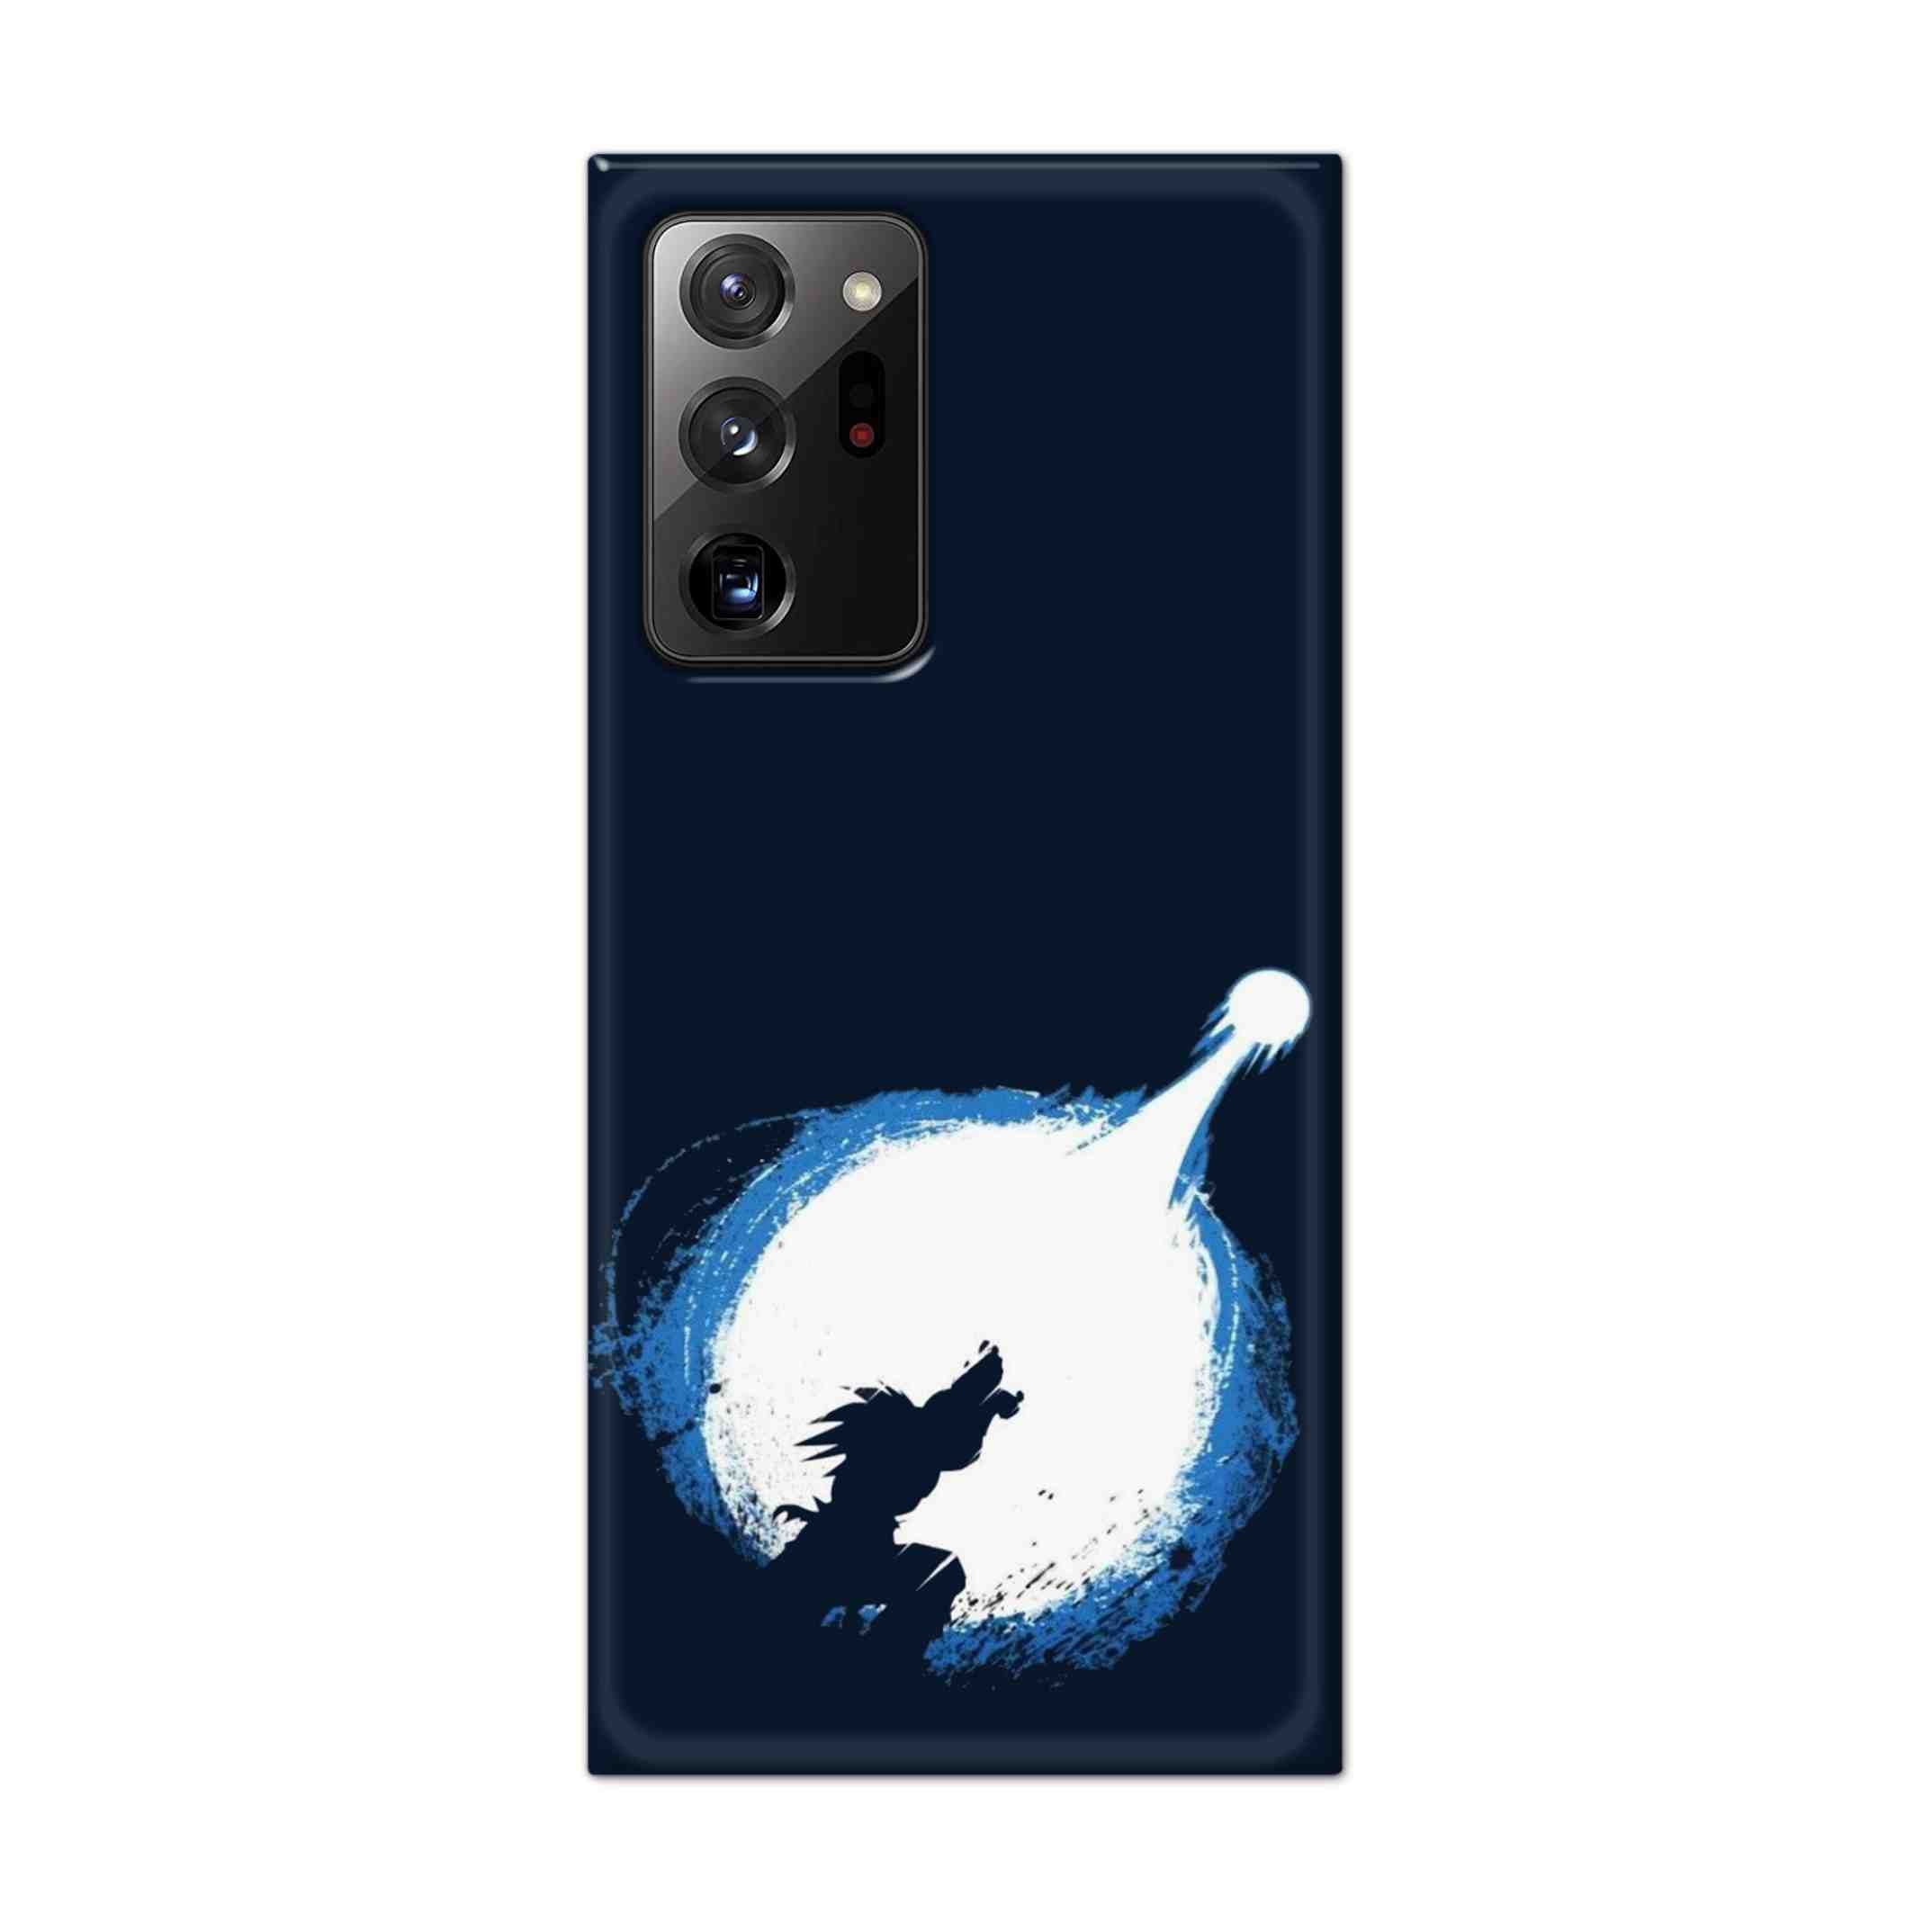 Buy Goku Power Hard Back Mobile Phone Case Cover For Samsung Galaxy Note 20 Ultra Online